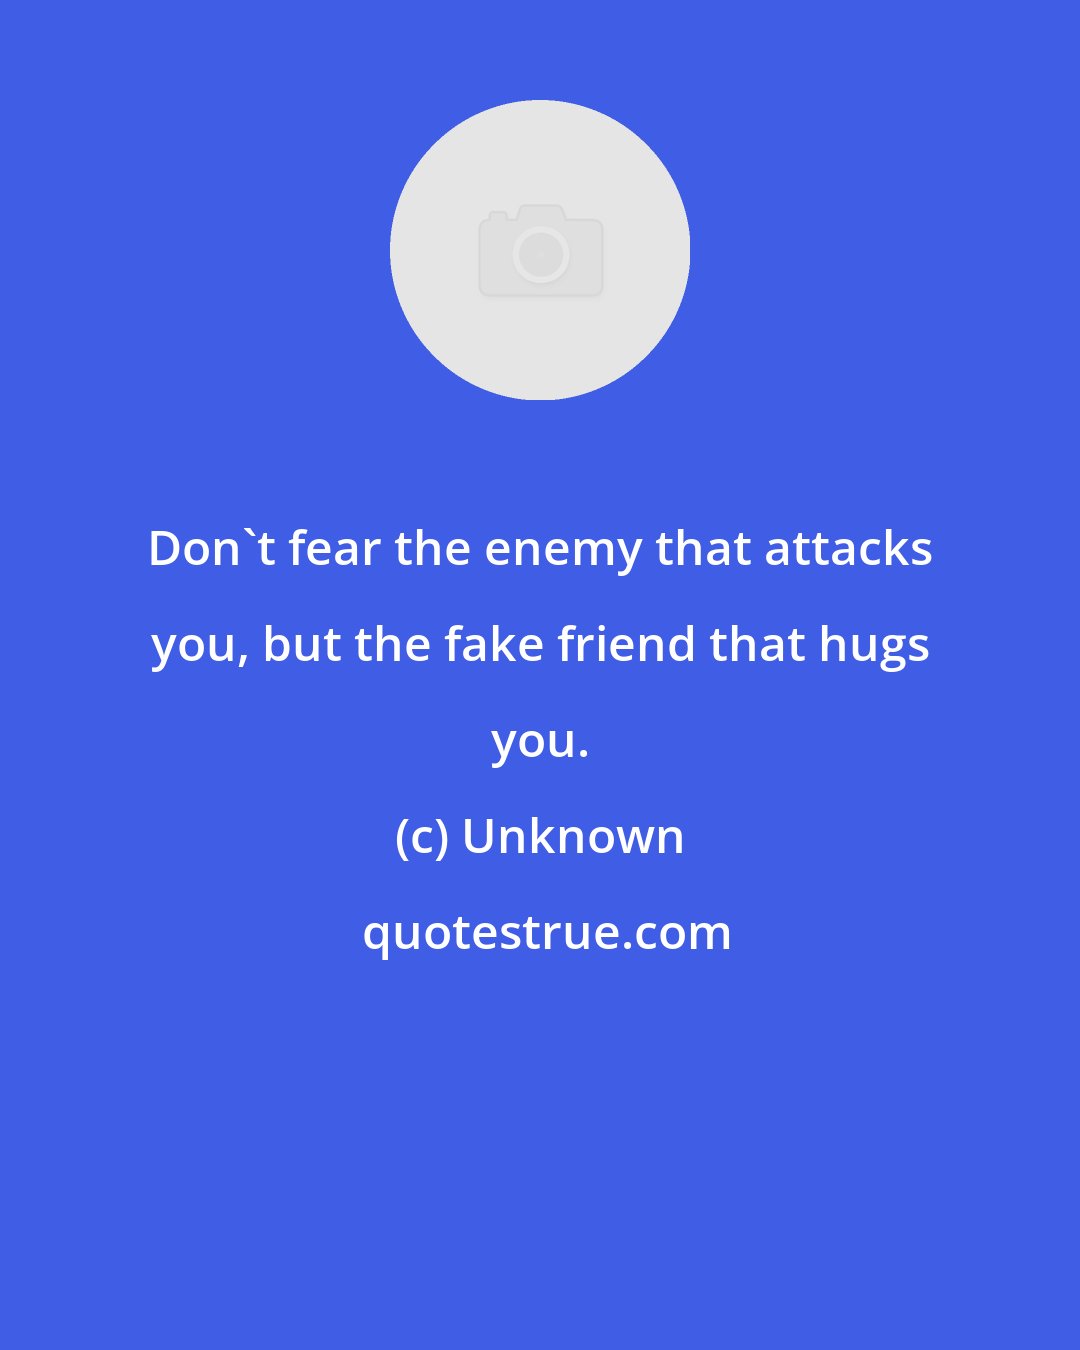 Unknown: Don't fear the enemy that attacks you, but the fake friend that hugs you.